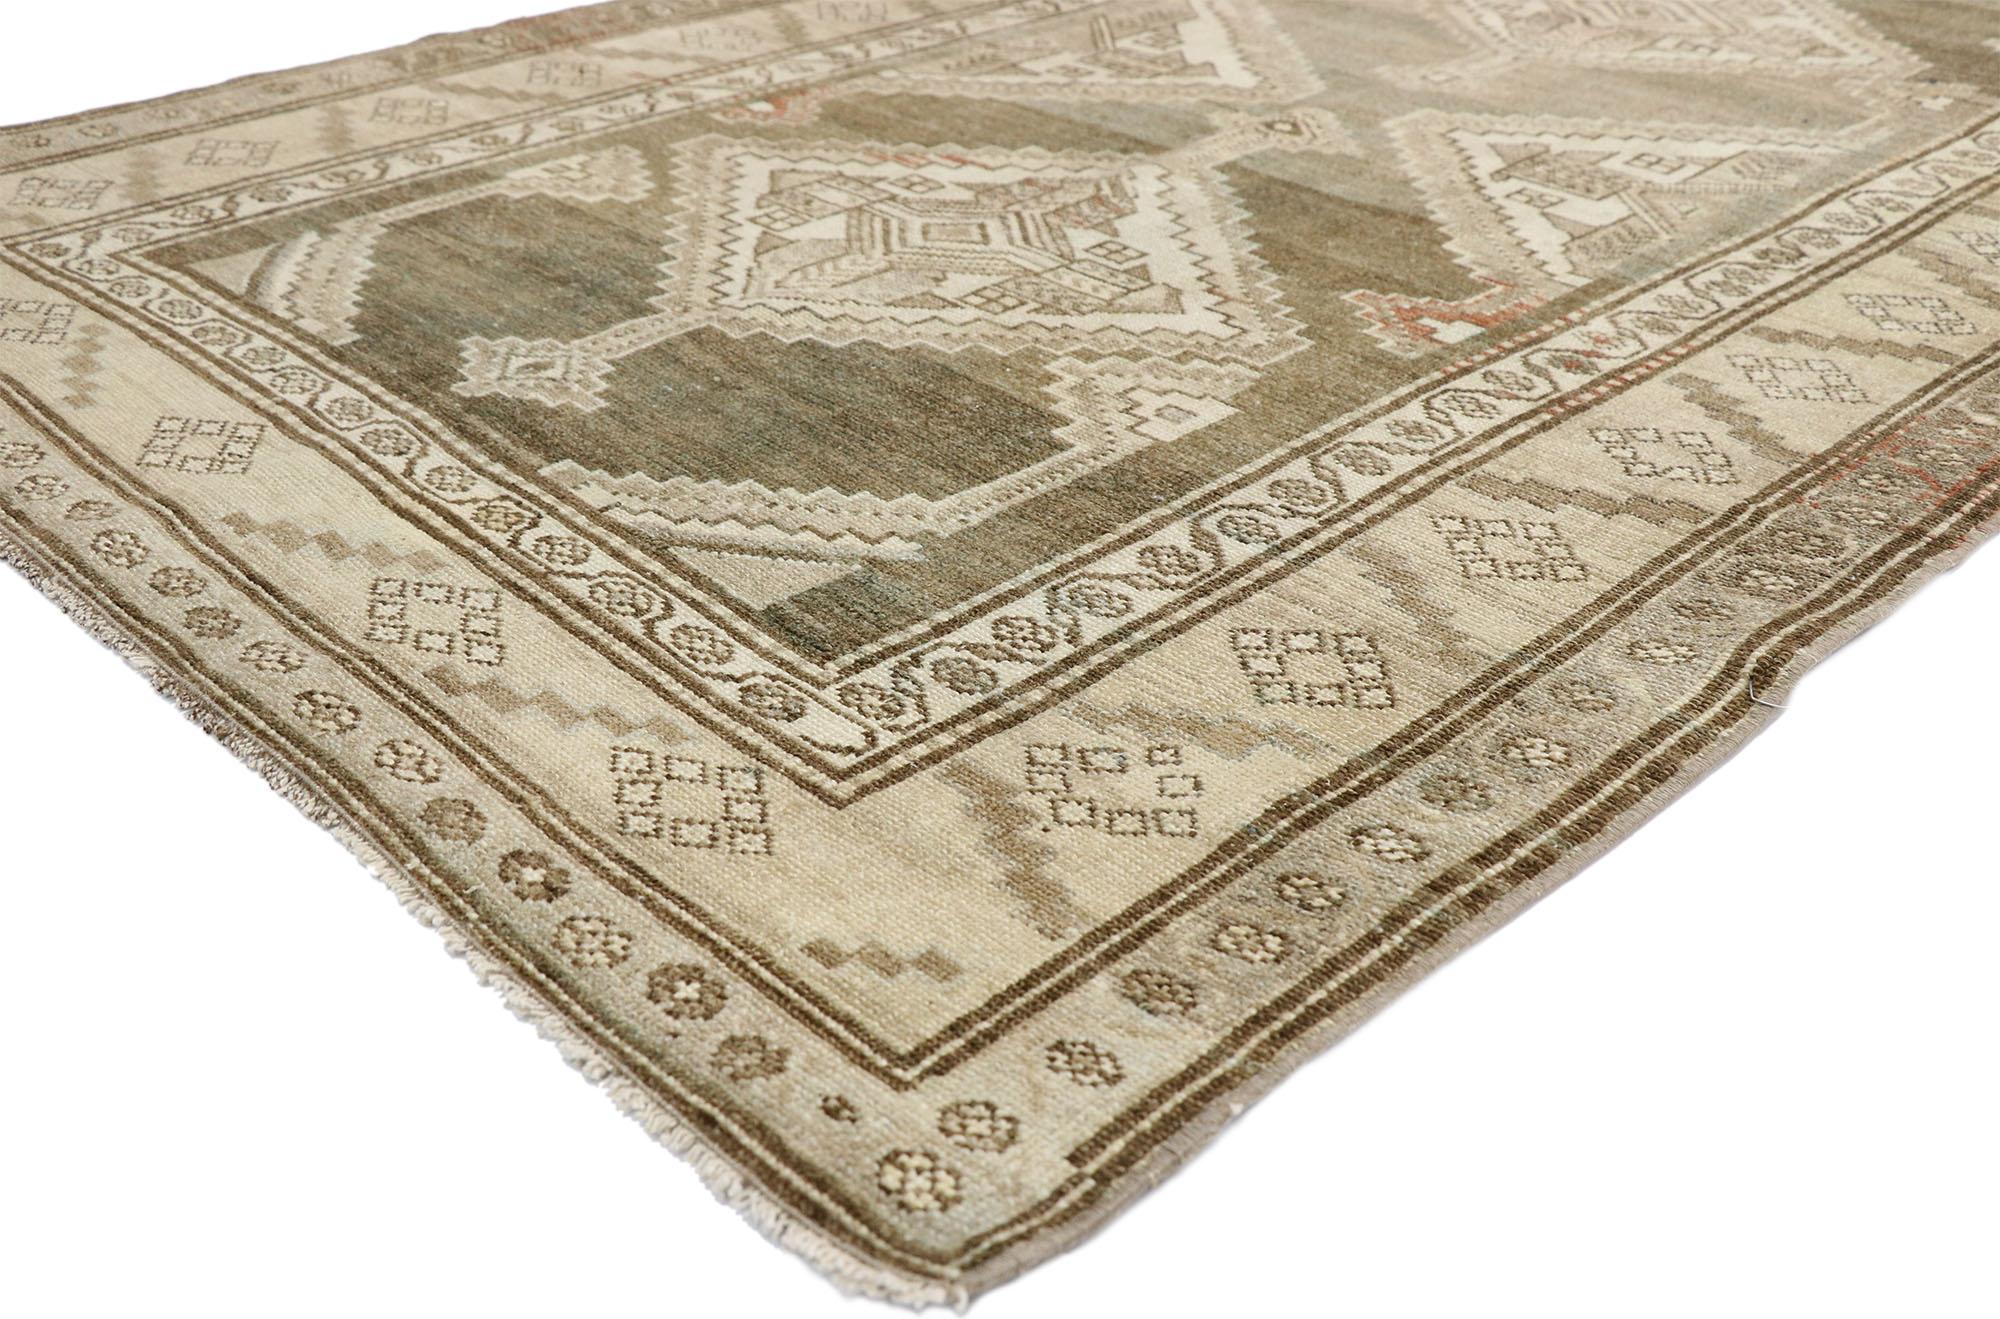 52563 Antique Turkish Malayer Rug Runner, 04'02 x 12'02.  Turkish Malayer rug runners are meticulously handcrafted, long and narrow rugs blending Turkish and Persian influences, featuring intricate designs such as stepped diamond-shaped medallions,